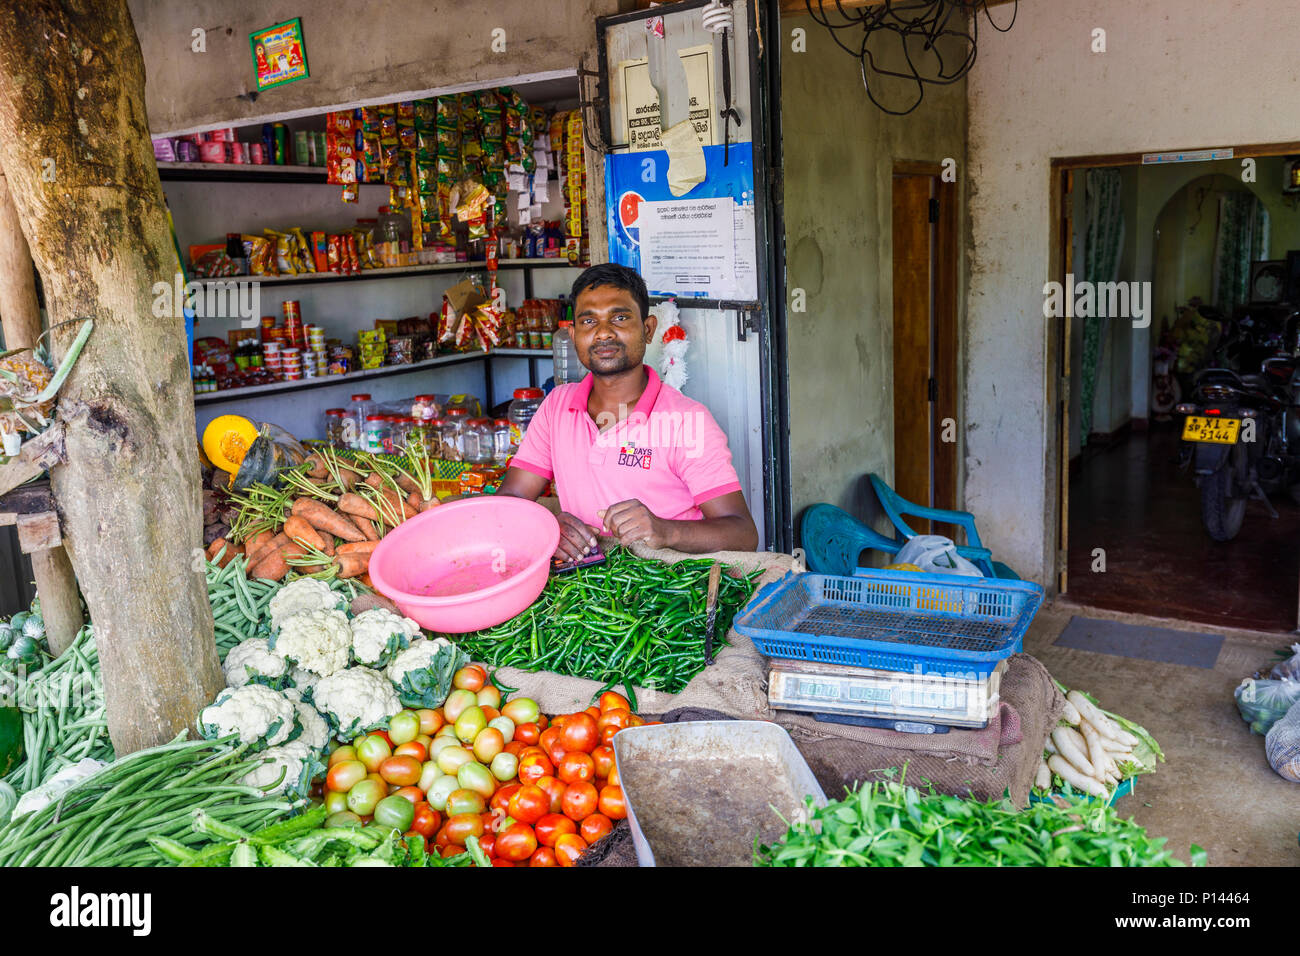 Stallholder in a rural roadside vegetable and grocery stall selling fresh local produce, Horagampita district, near Galle, Sri Lanka Stock Photo